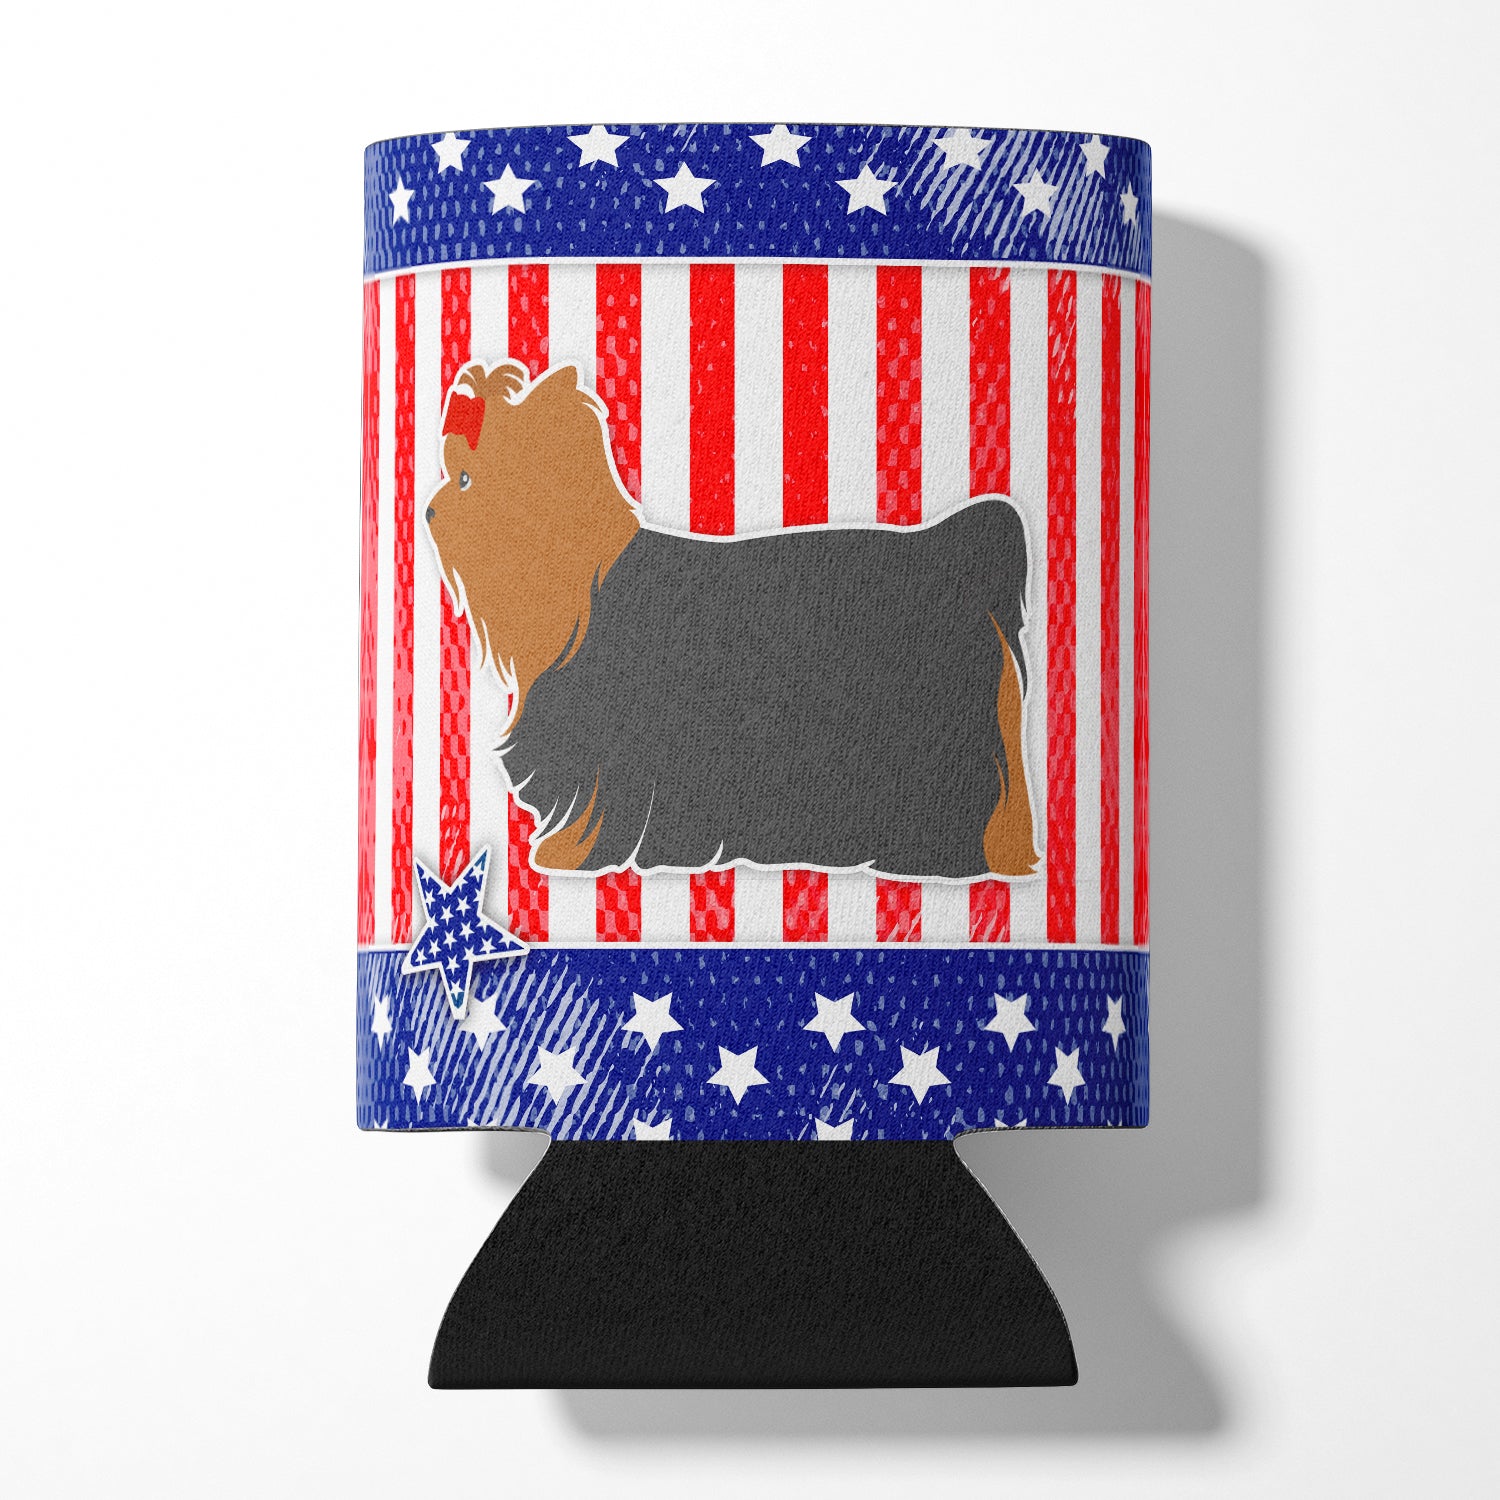 USA Patriotic Yorkshire Terrier Yorkie Can or Bottle Hugger BB3334CC  the-store.com.